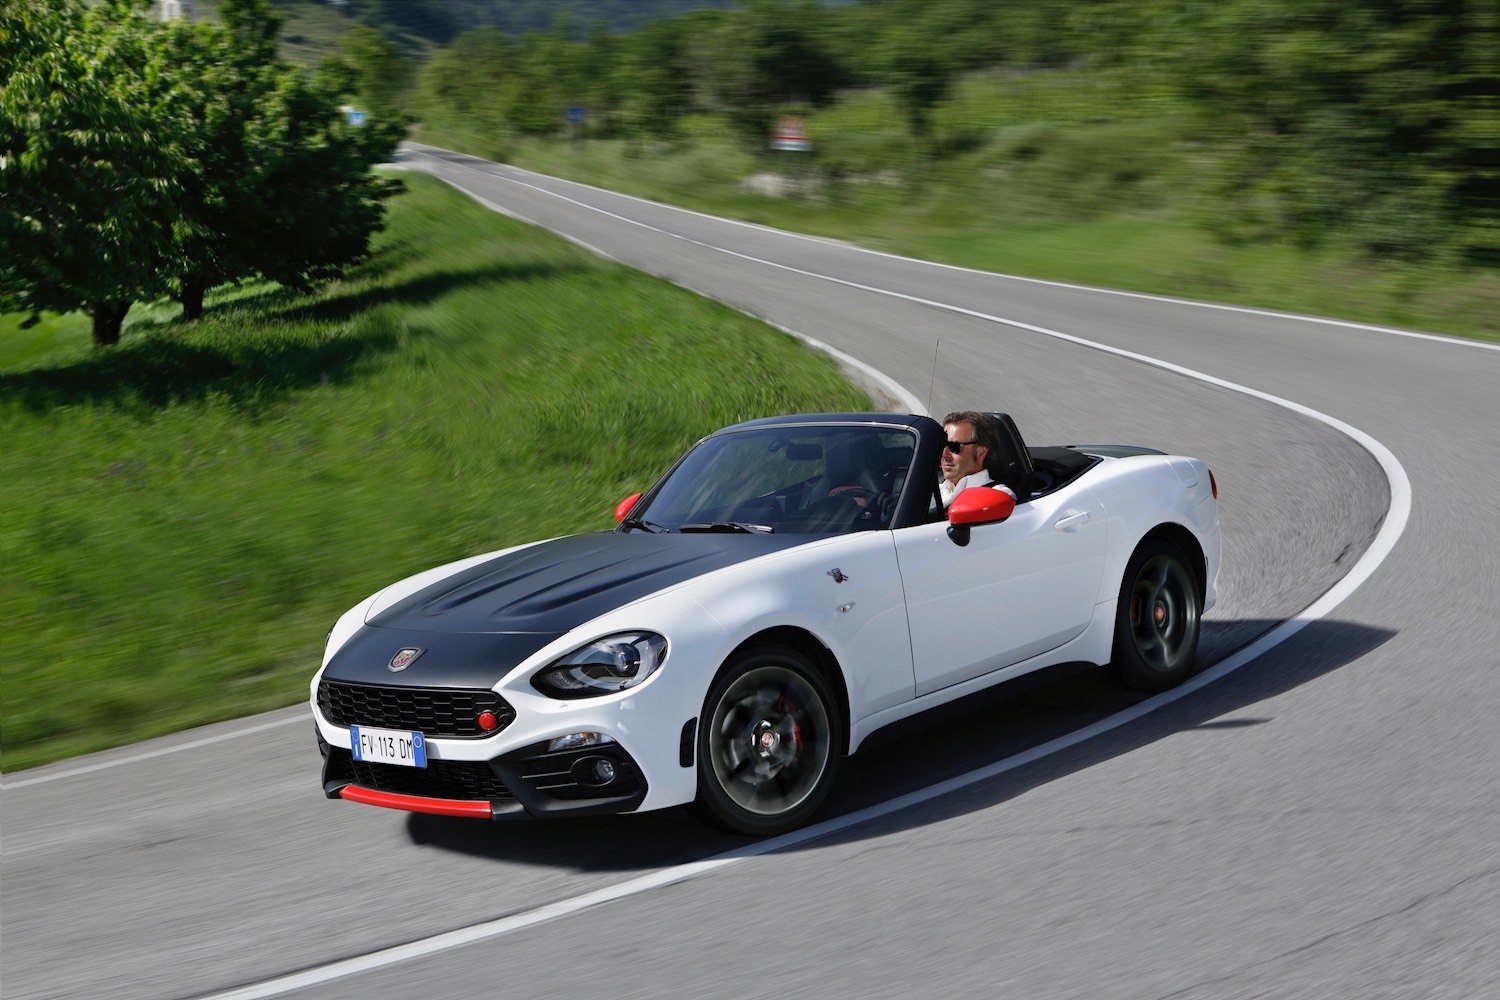 Jonathan Humphrey reviews the Abarth 124 Spider for Drive 14